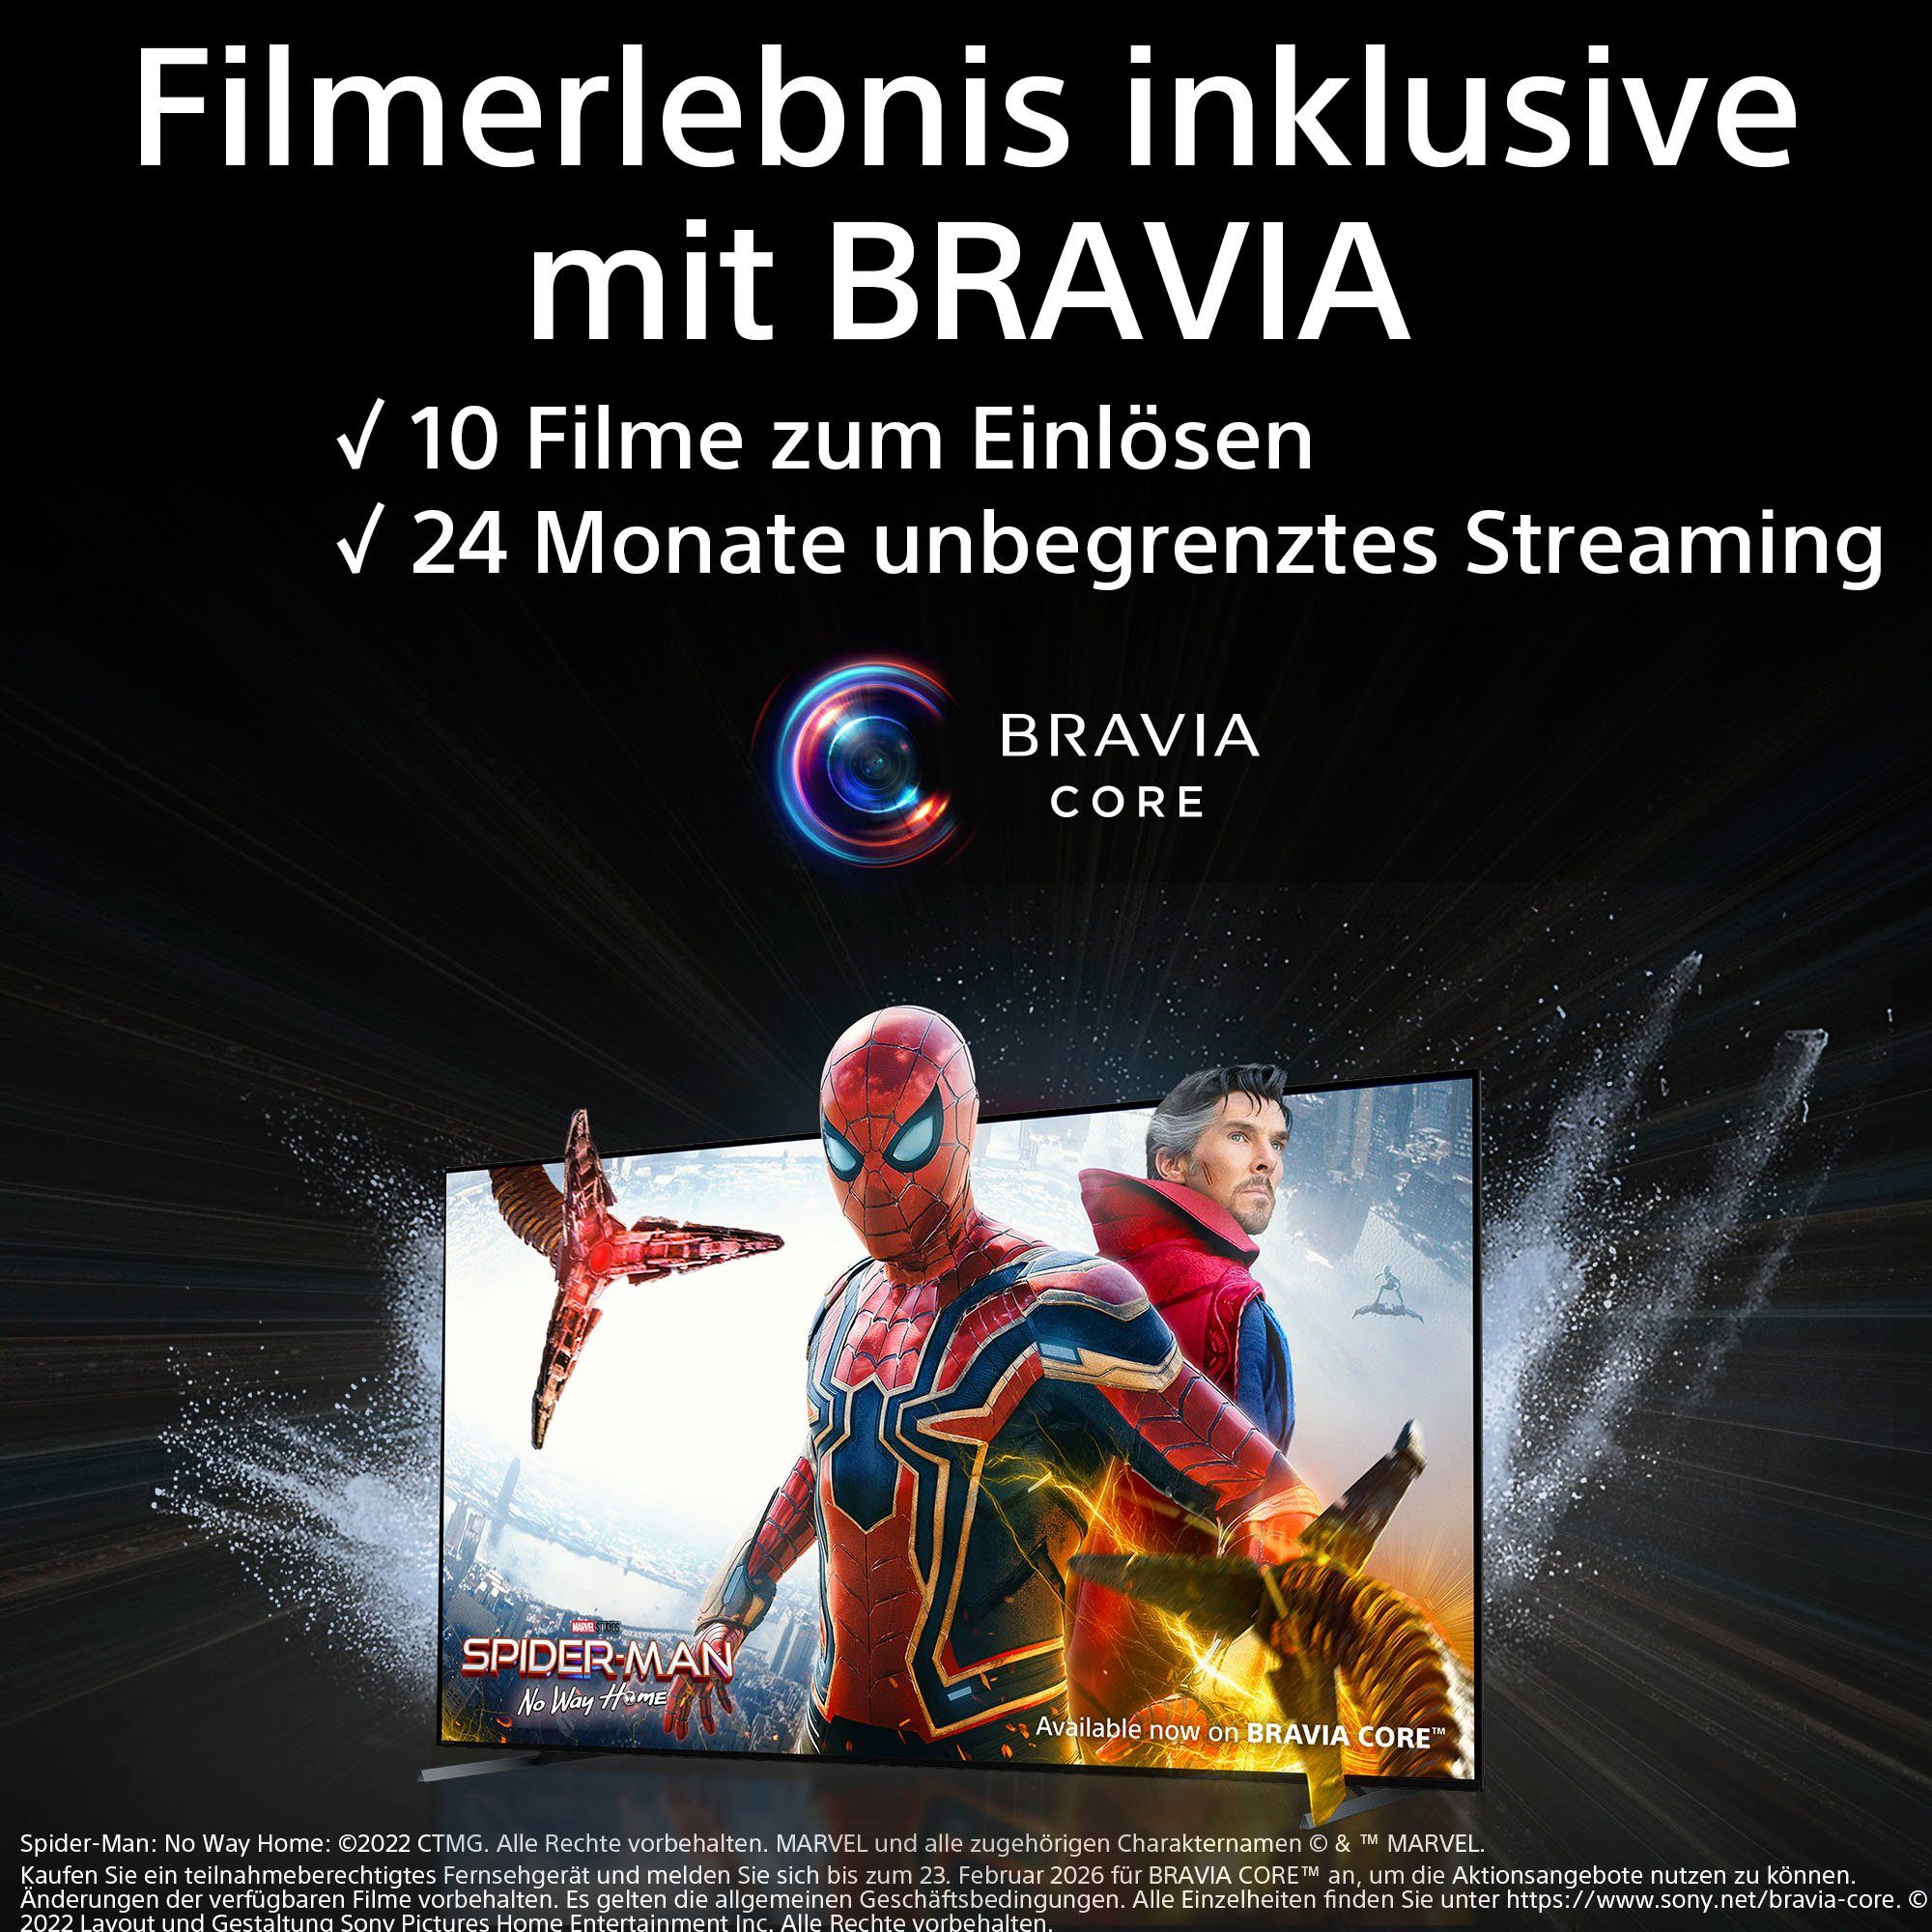 XR-85X90L PS5-Features) LED-Fernseher mit PRO, TRILUMINOS Google Sony Ultra 4K cm/85 HD, (215 BRAVIA TV, Zoll, exklusiven CORE,